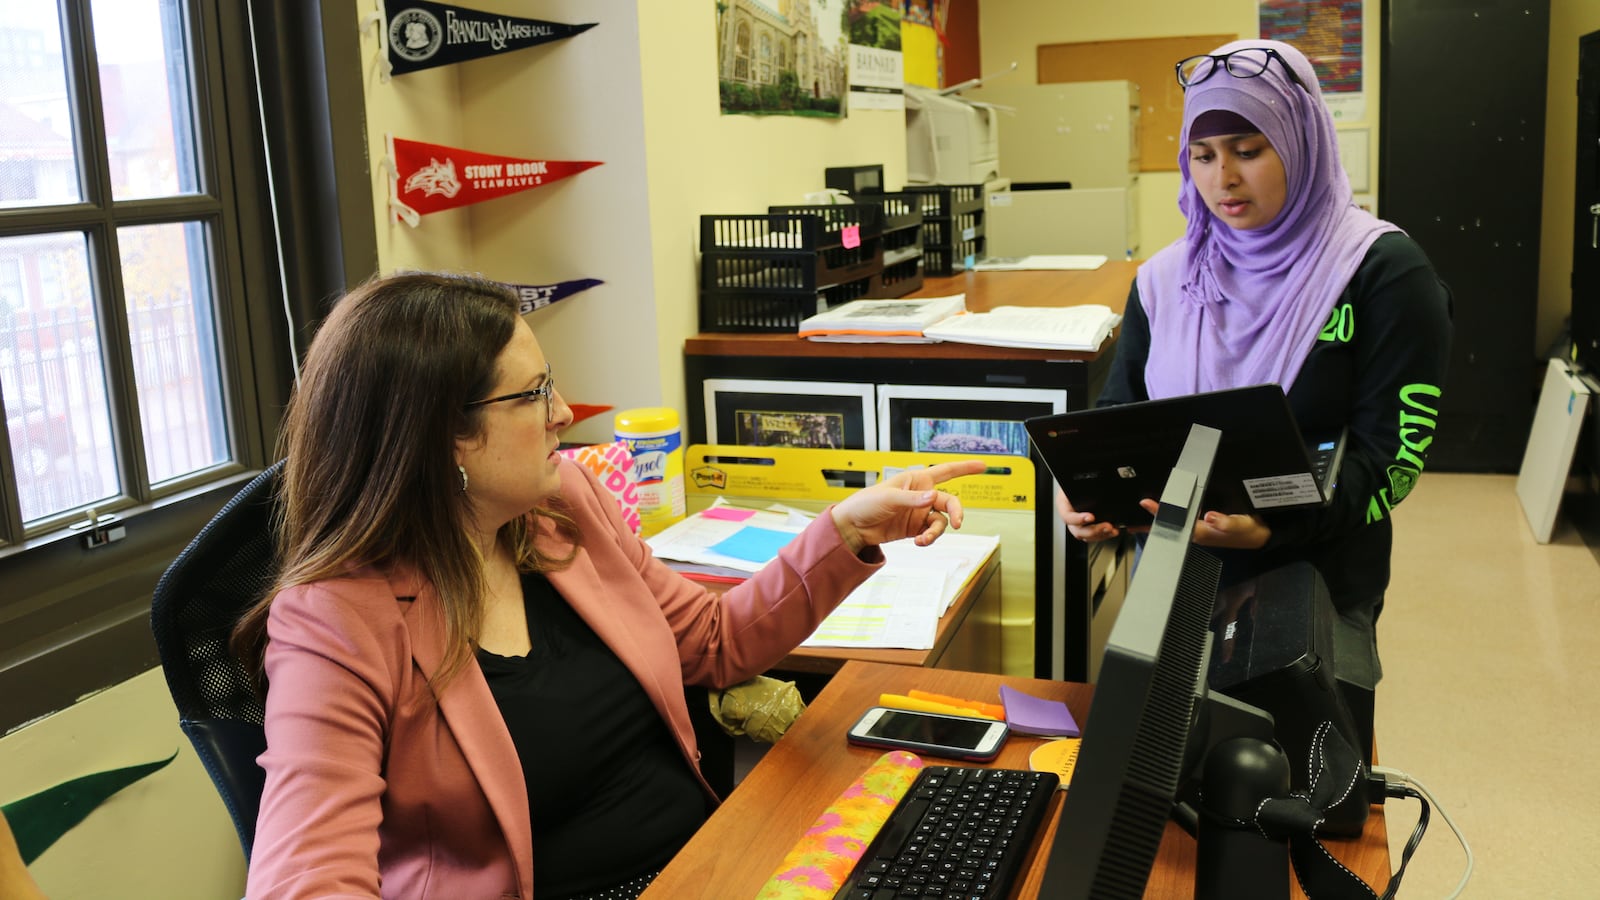 College counselor Jessica Kane, left, helps a student with her college application. Through a program called College Bound Initiative, Kane helps students at The Young Women's Leadership School of Queens learn the intricacies of applying to college.